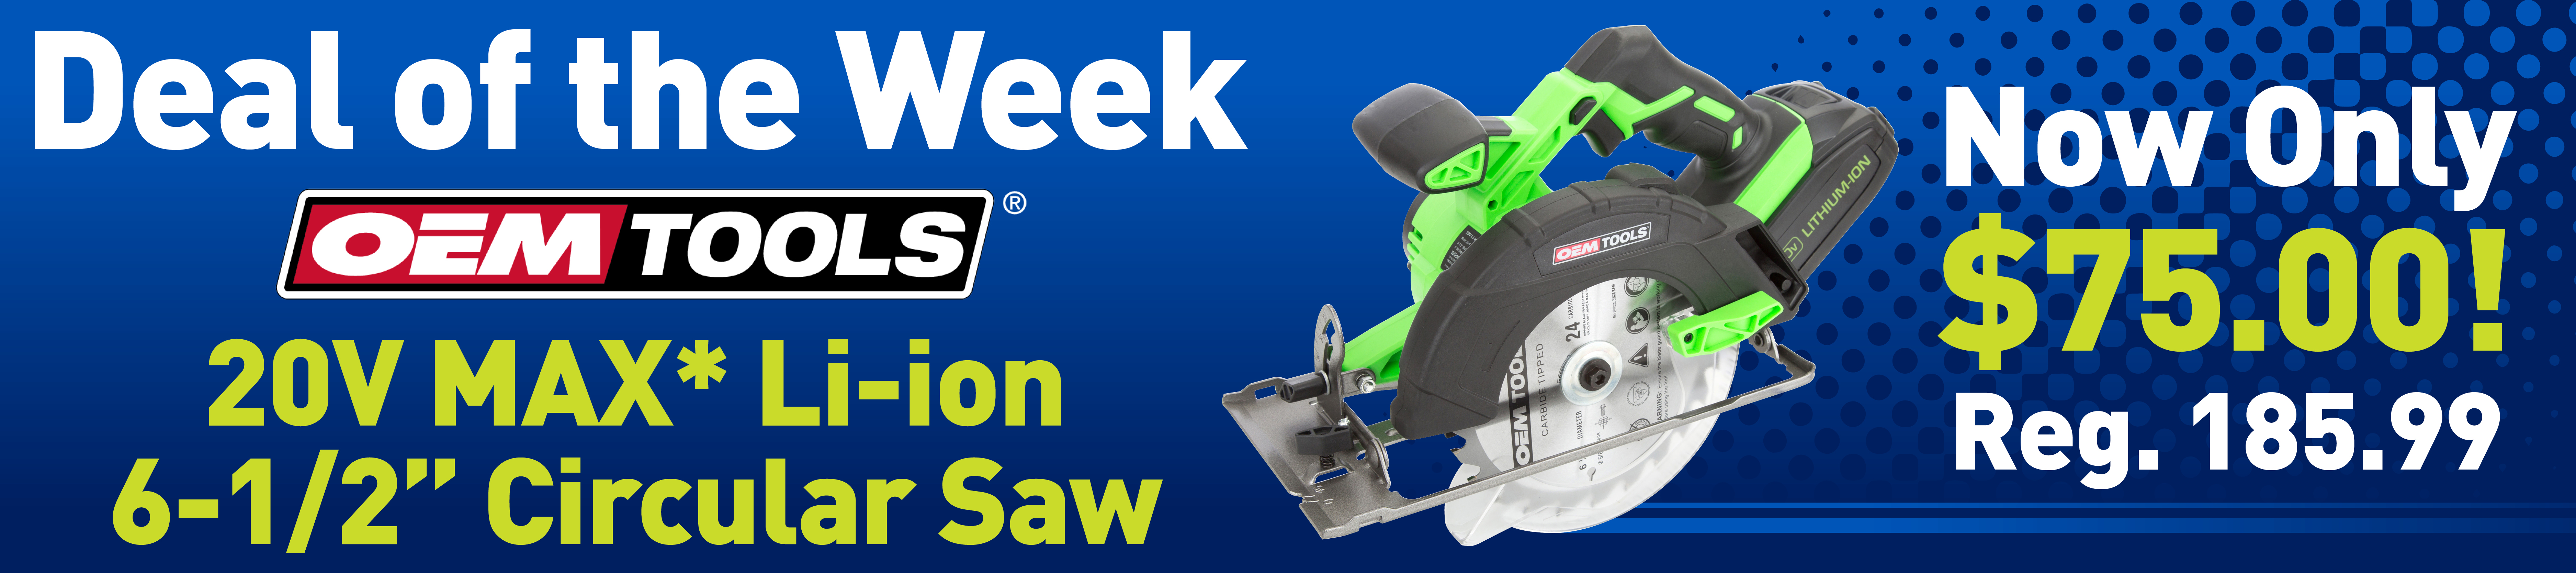 Deal of the Week 20V Max L-ion Saw